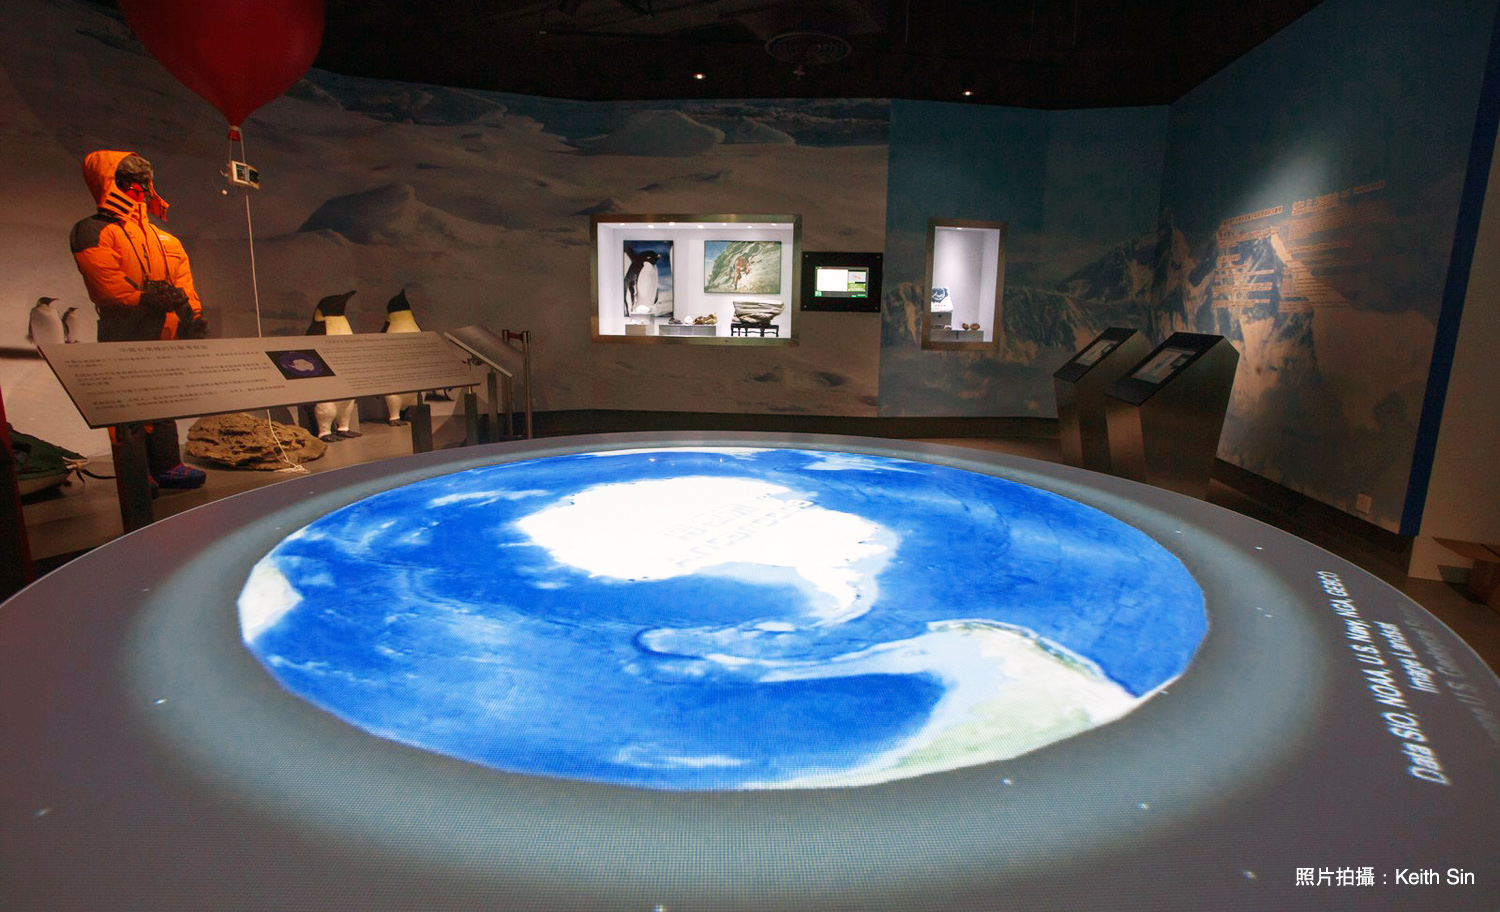 The Jockey Club Museum of Climate Change offers a pioneering interactive and multimedia exhibition which showcases valuable collections and provides information about climate change